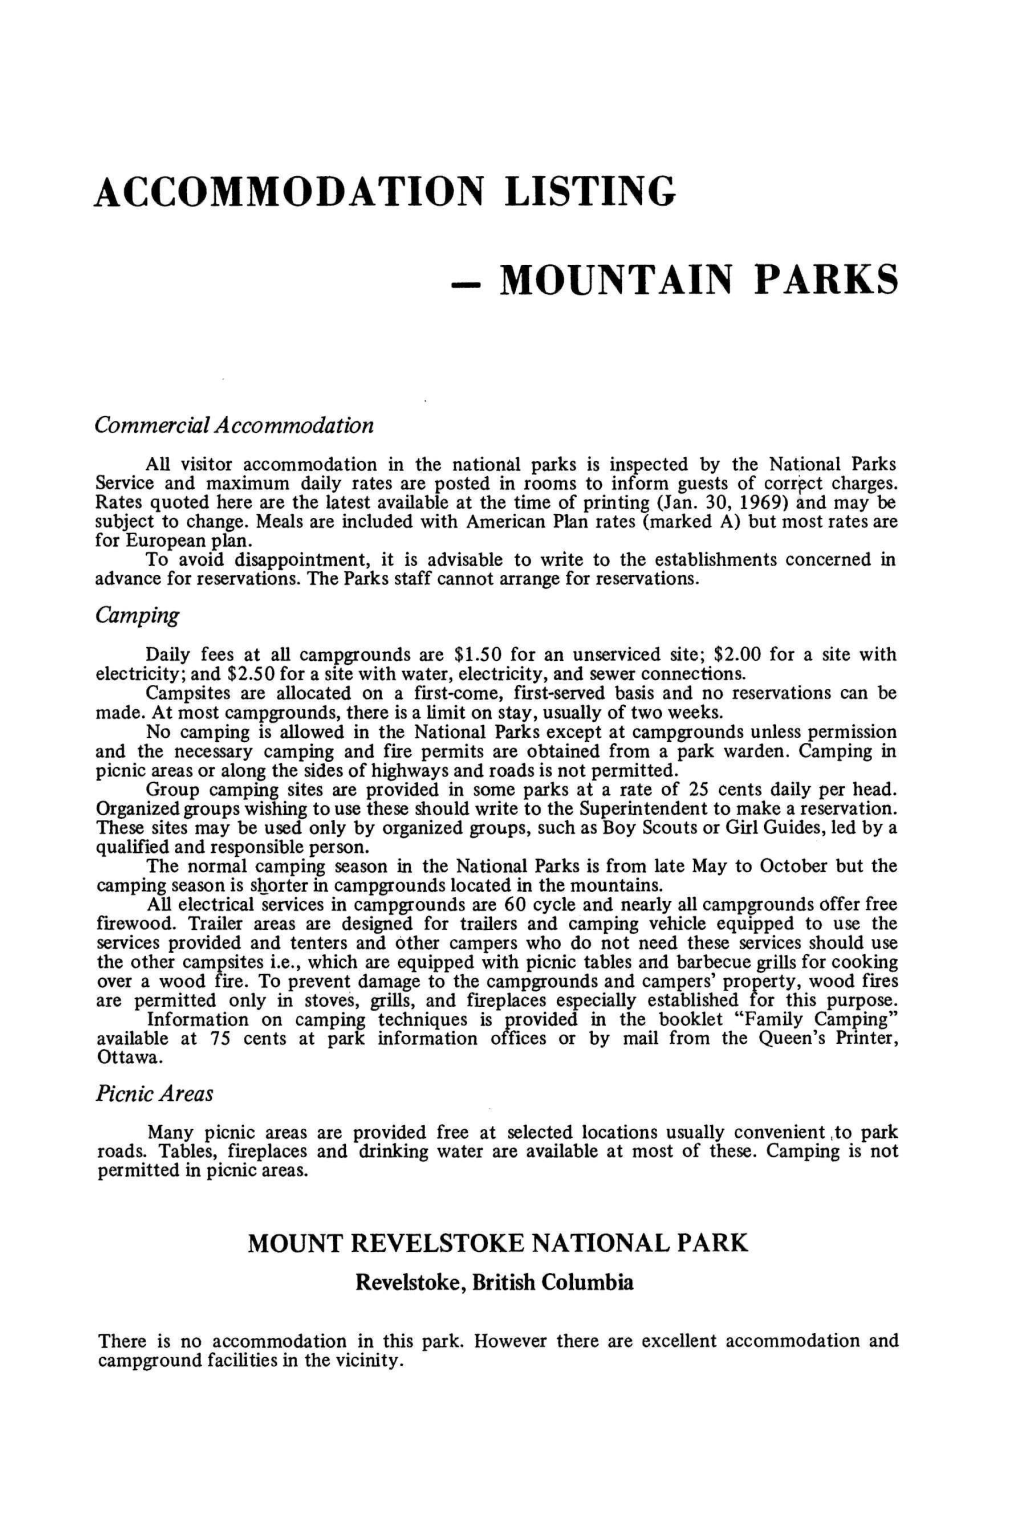 Accommodation Listing - Mountain Parks